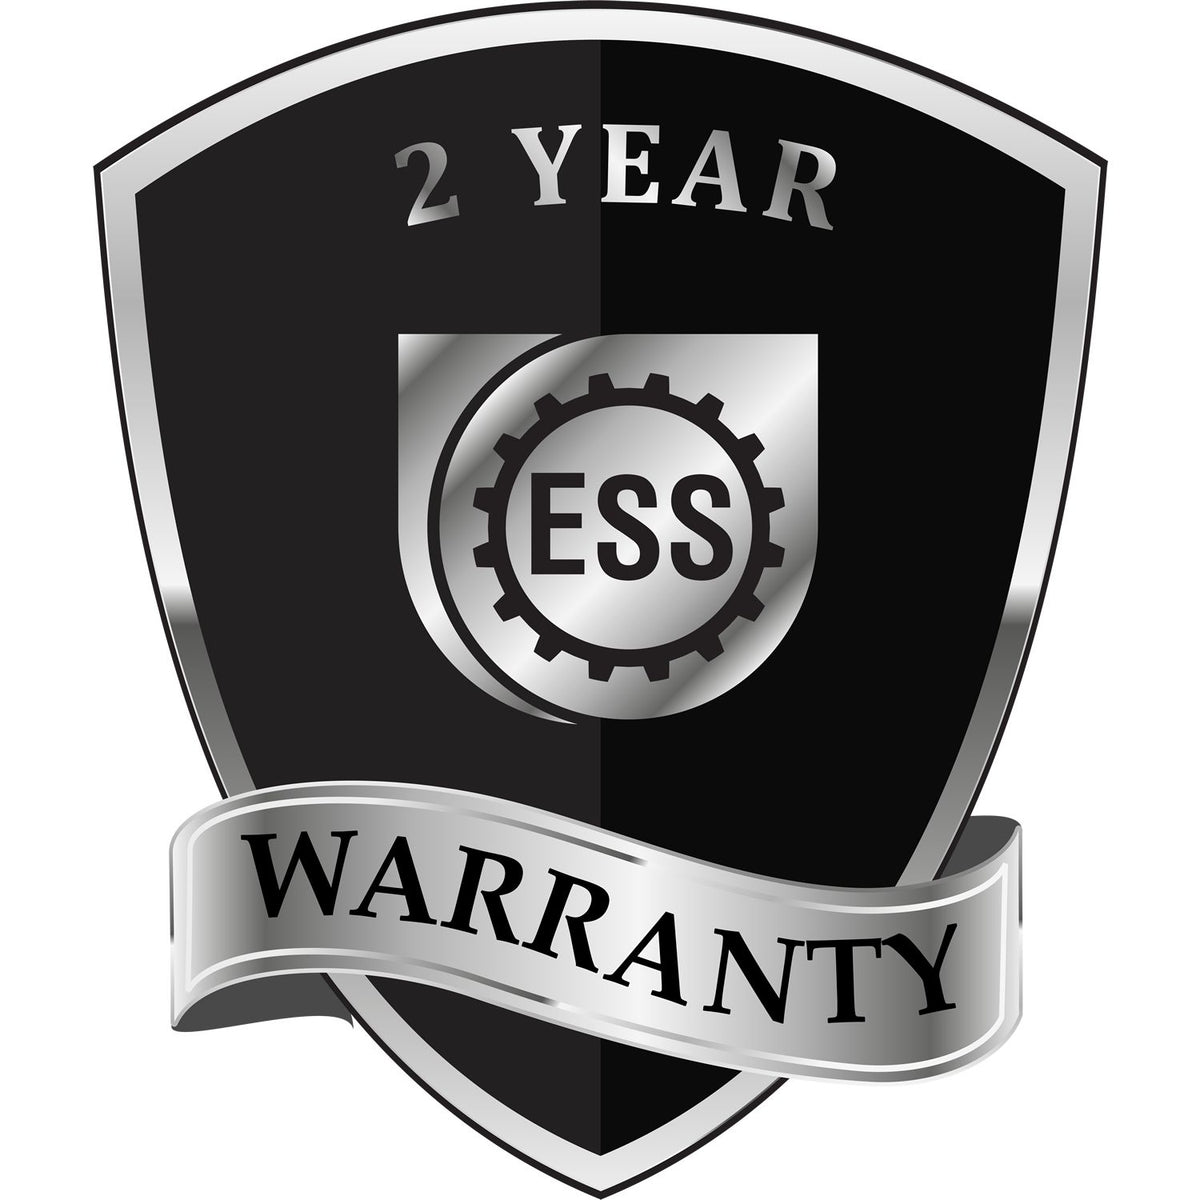 A black and silver badge or emblem showing warranty information for the Gift Utah Geologist Seal